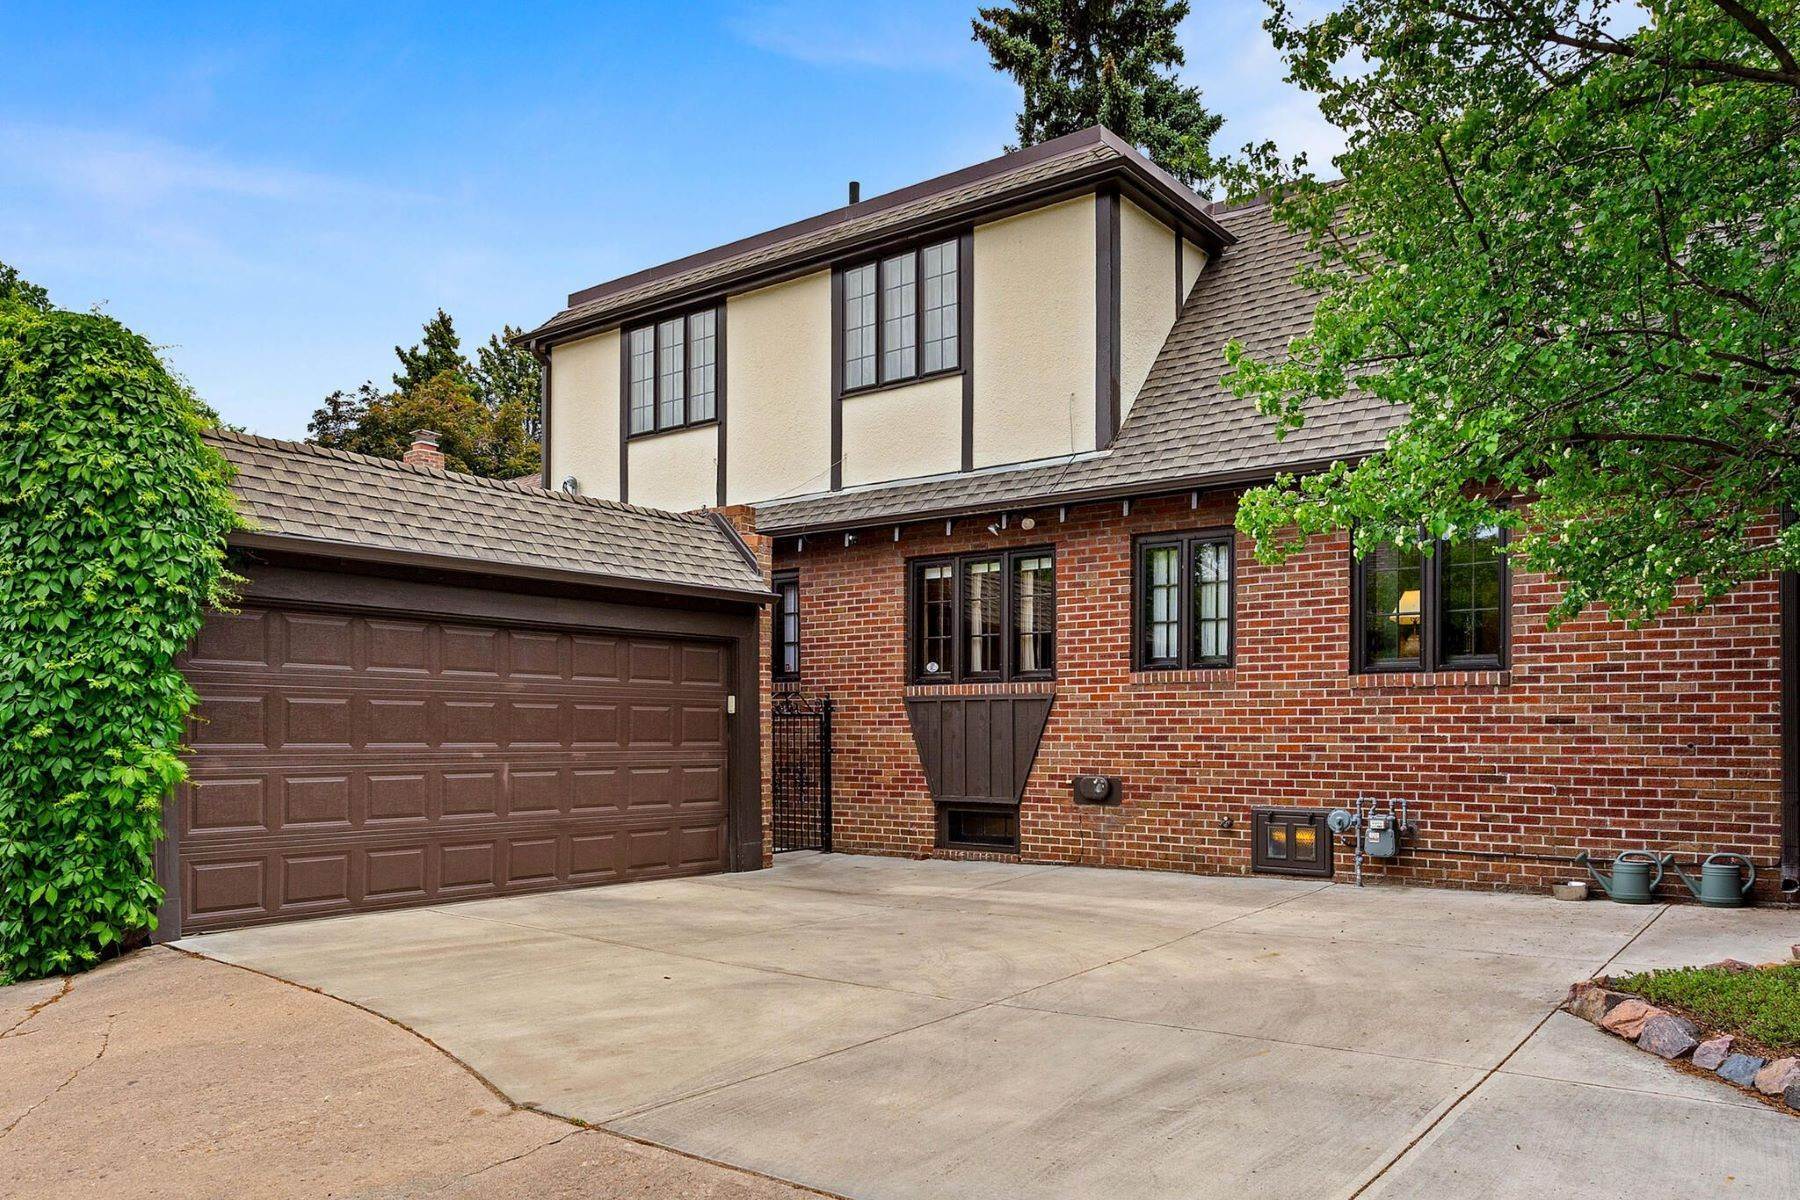 39. Single Family Homes for Active at Beautiful and Meticulously Maintained Tudor On Prestigious Montview Boulevard! 6003 Montview Boulevard Denver, Colorado 80207 United States